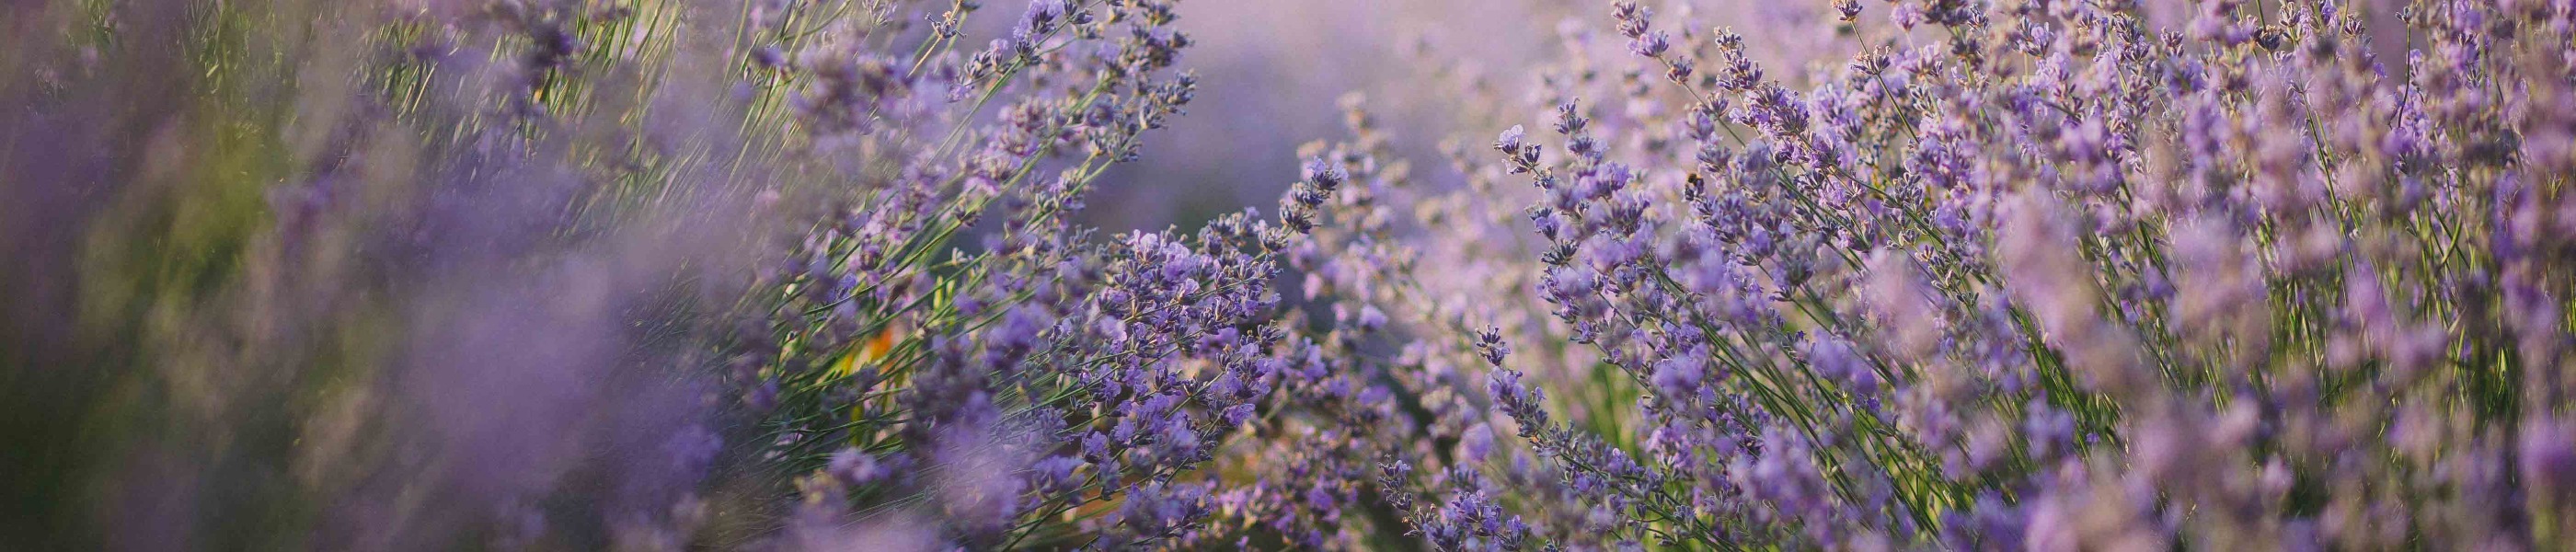 outdoors, lavender fields, things to do, attractions,